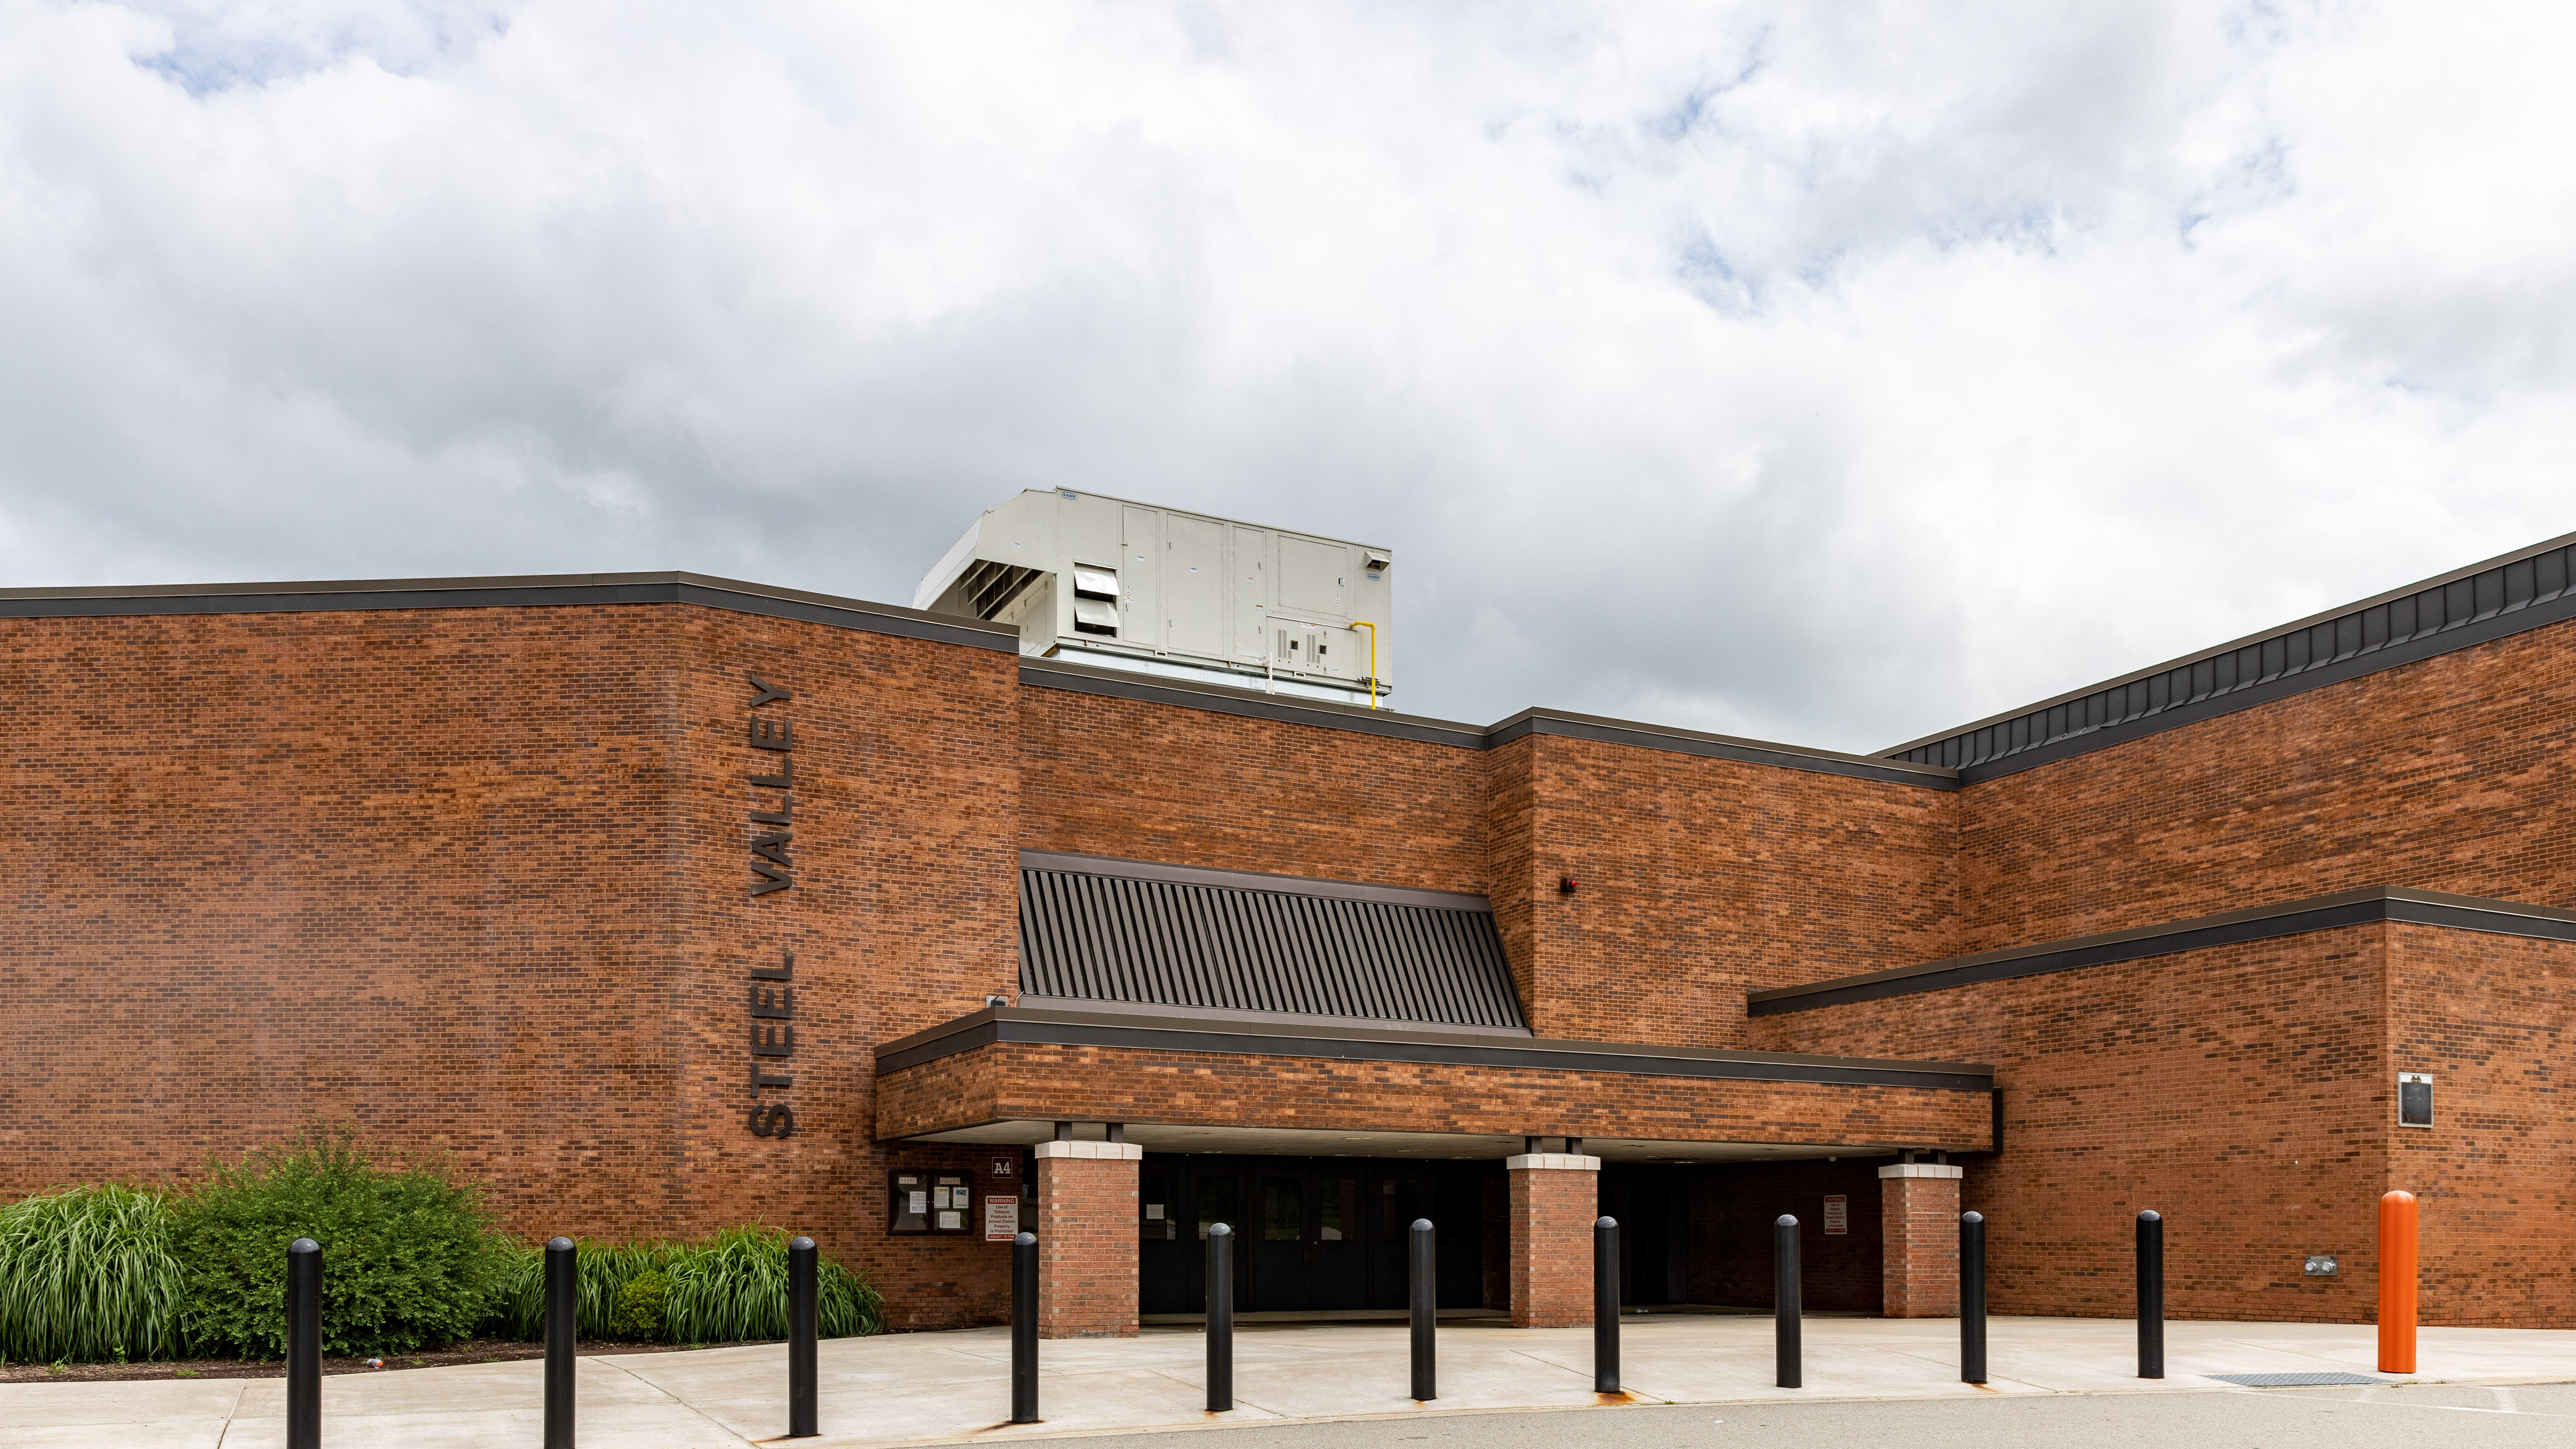 An image of the Steel Valley High School entrance on a cloudy day. It is an orange-brown brick two-story multi-story building with a covered entrance supported by columns.